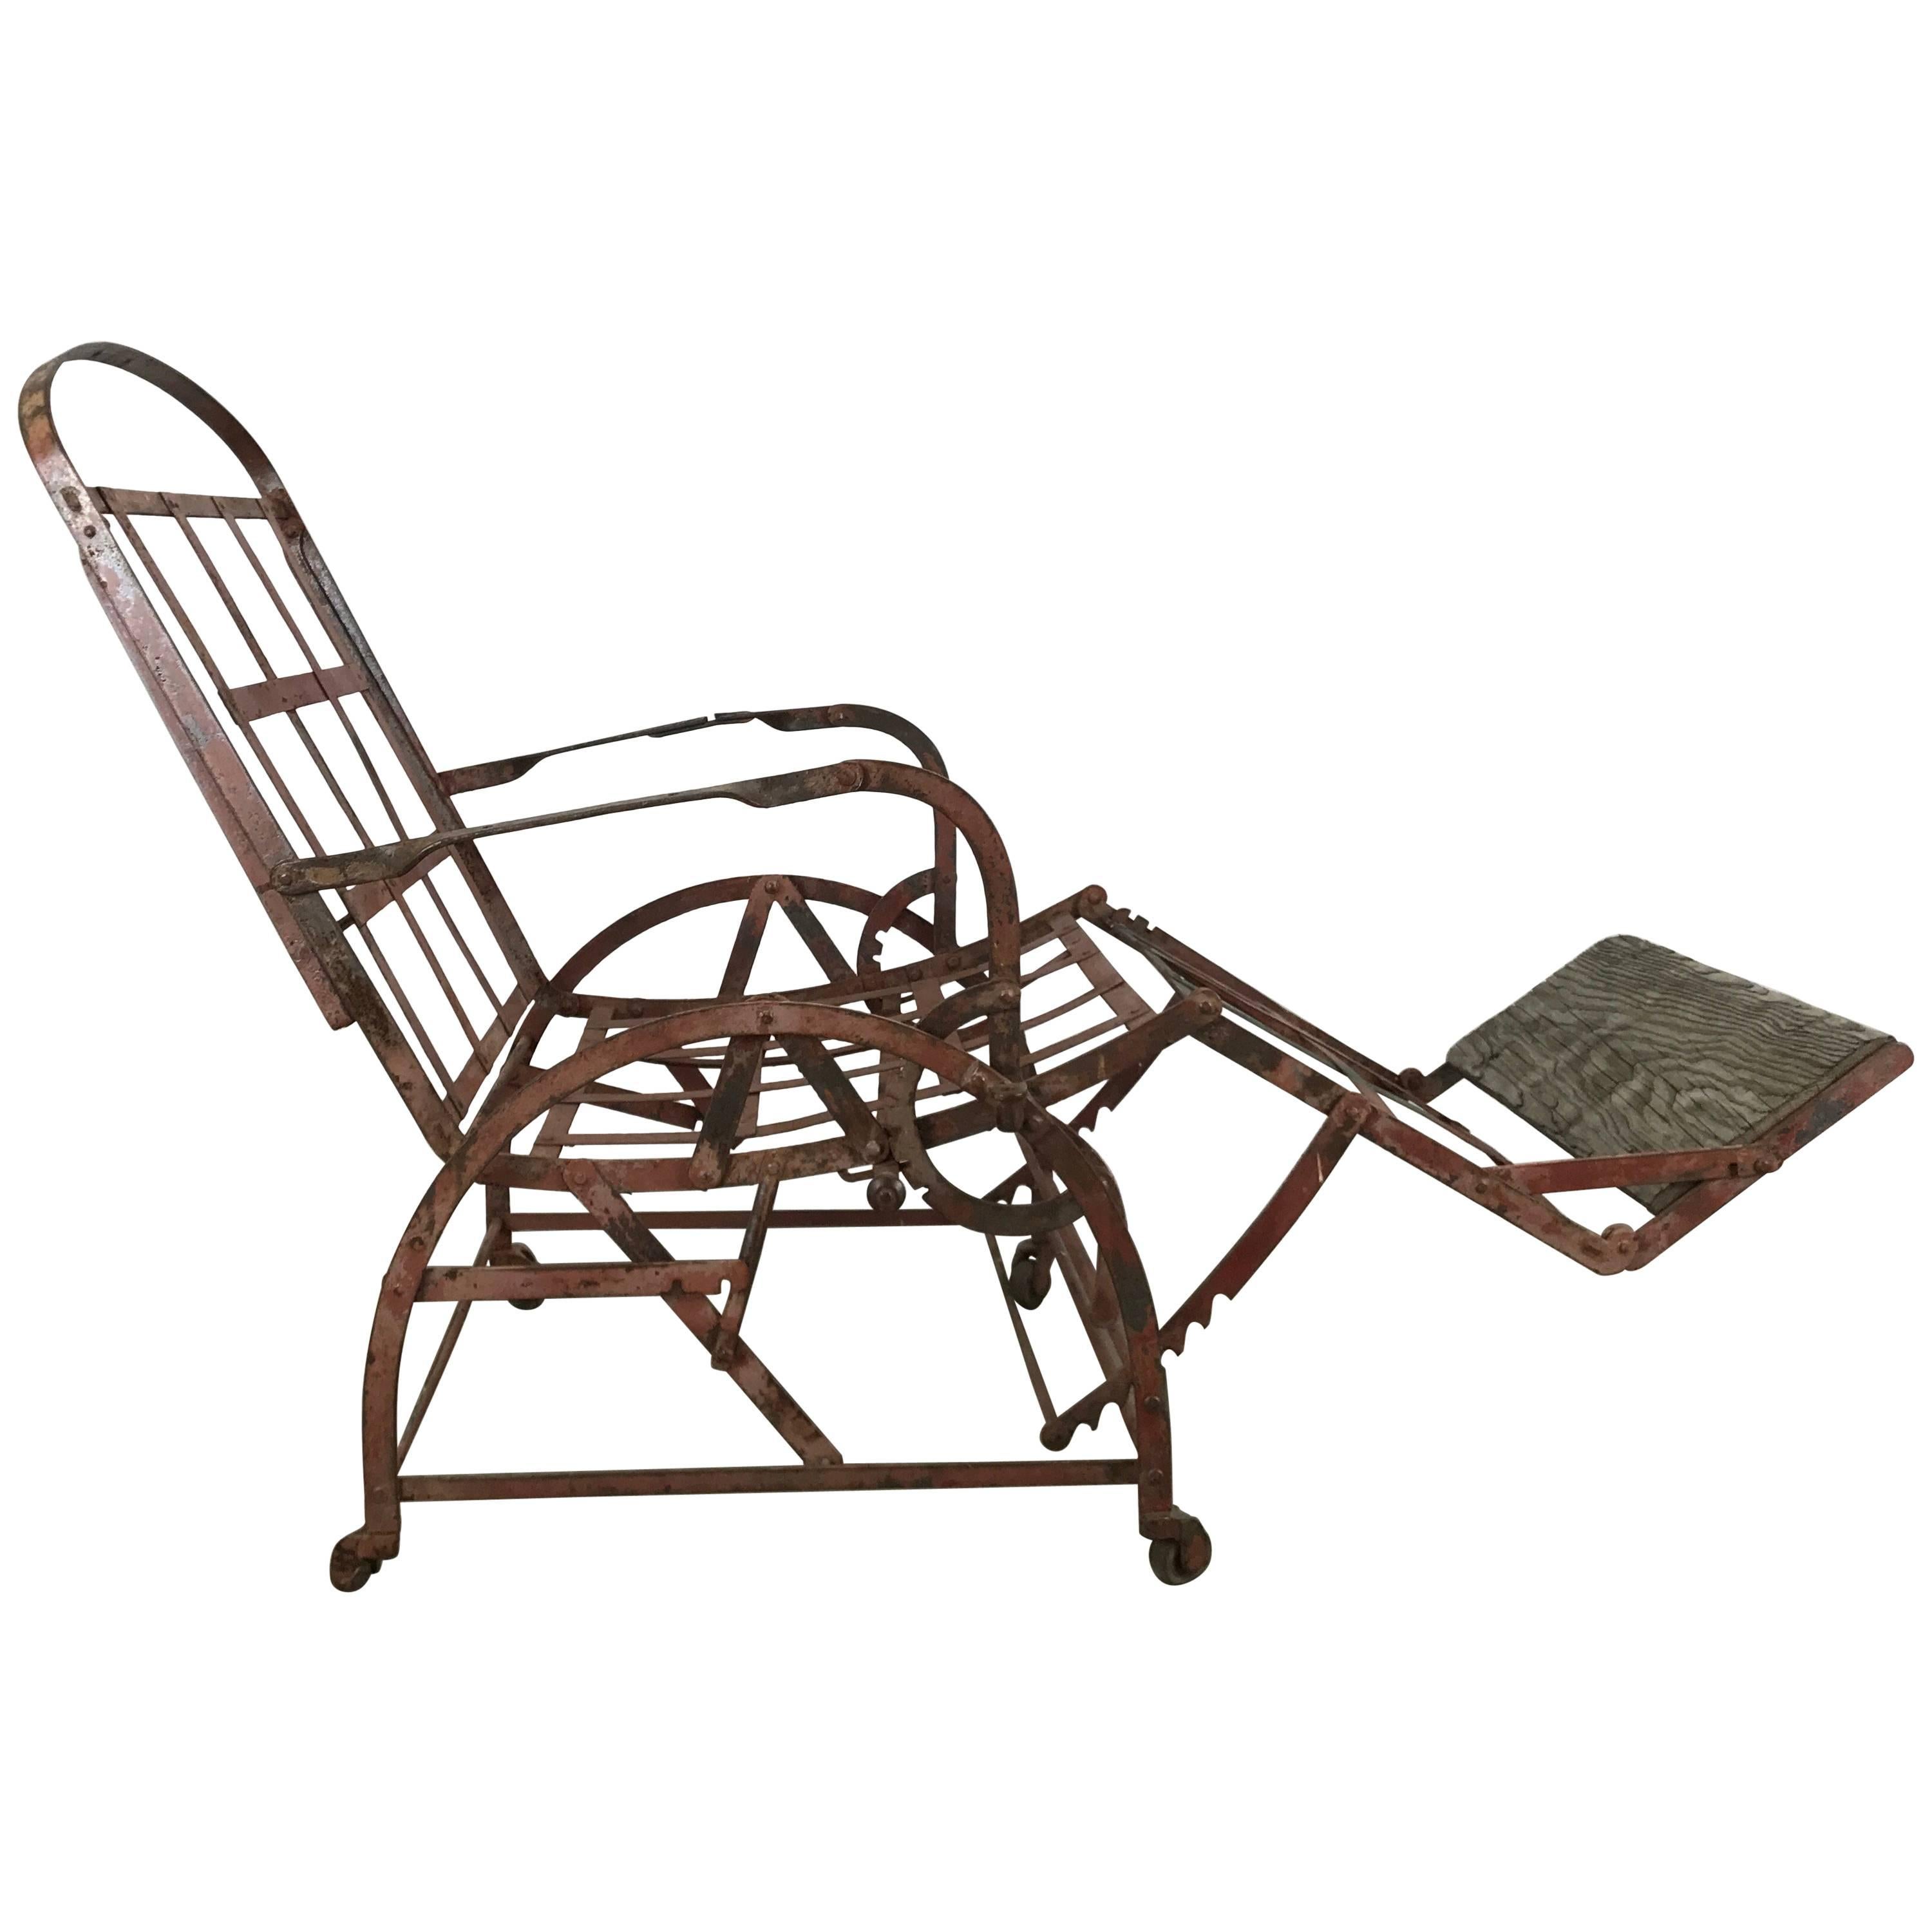 Iron Campaign Adjustable Folding Chair/Chaise/Bed. Wilson's 1871 For Sale